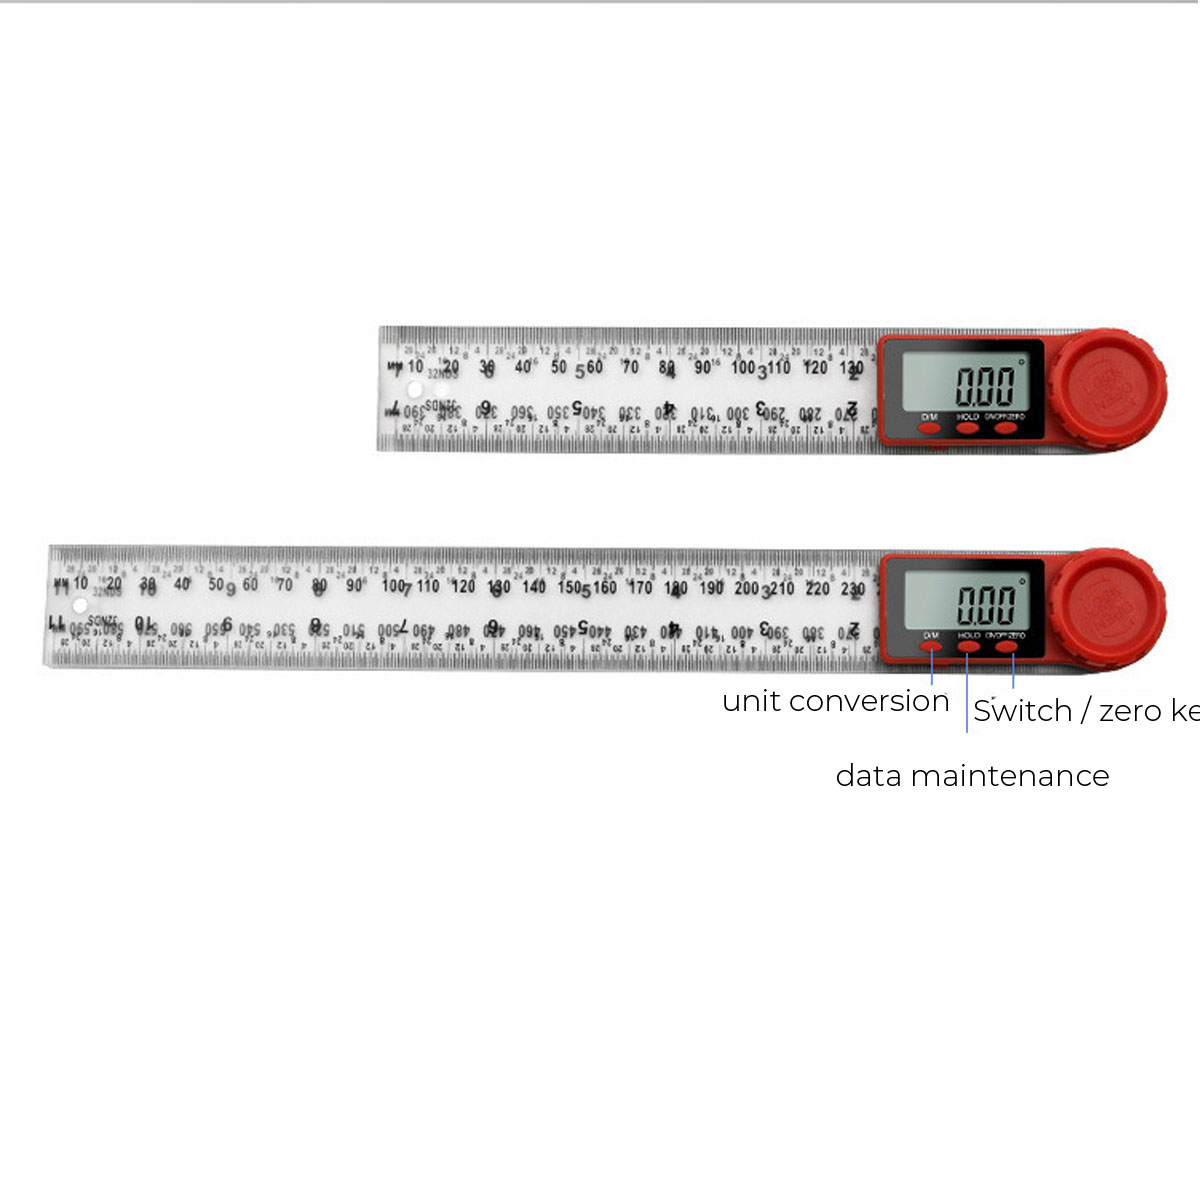 Digital-Angle-Meter-Inclinometer-Digital-Angle-Ruler-Electronic-Goniometer-Protractor-Angle-Finder-M-1738788